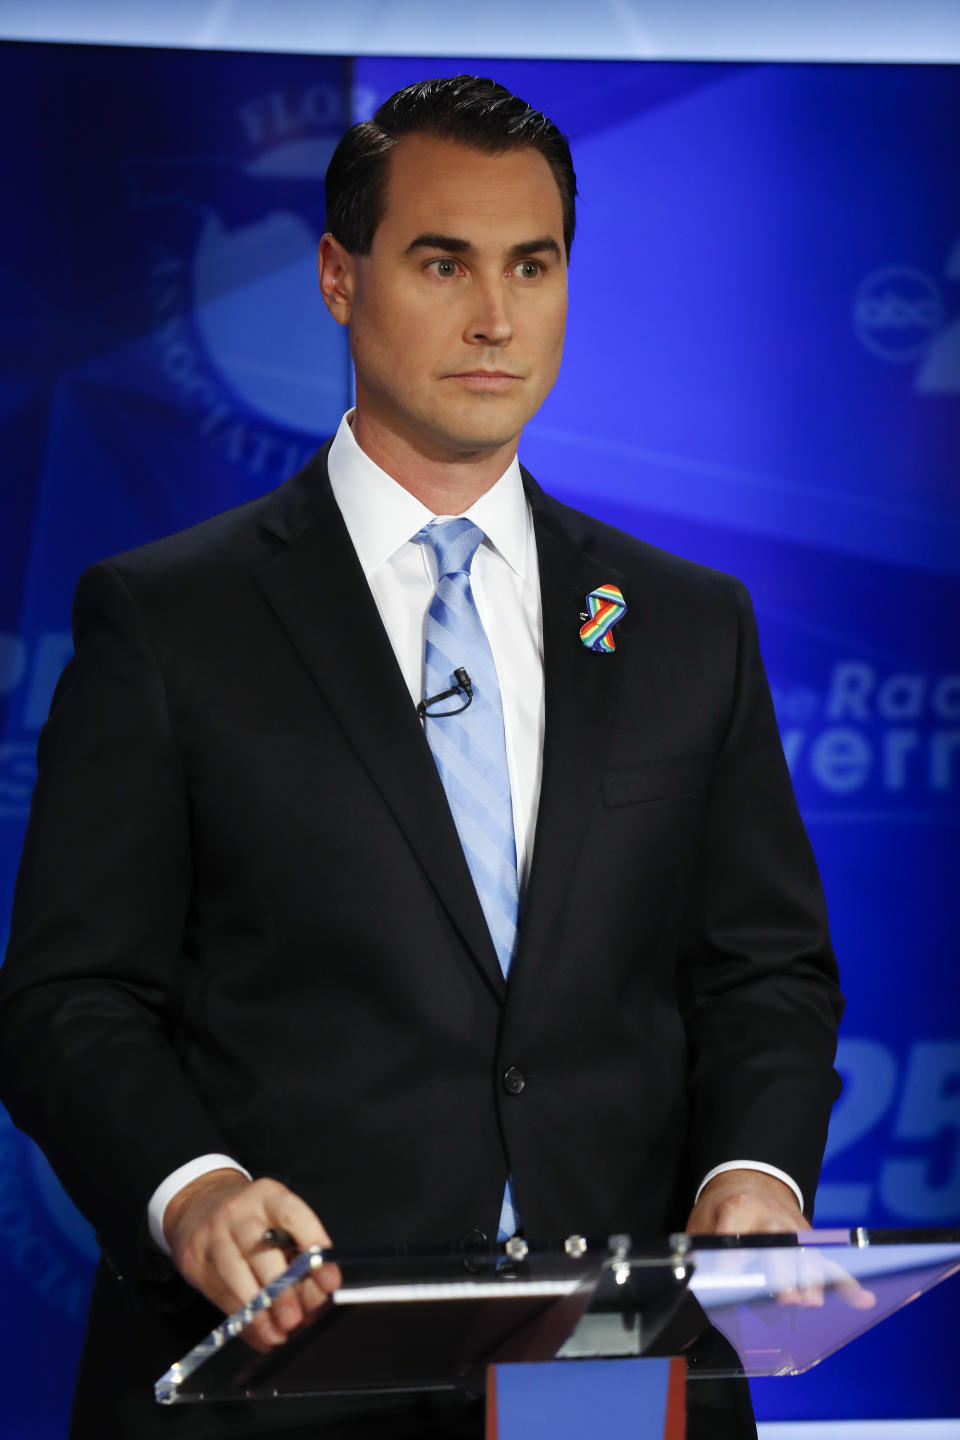 Democratic gubernatorial candidate Chris King awaits the start of a debate ahead of the Democratic primary for governor, Thursday, Aug. 2, 2018, in Palm Beach Gardens, Fla. (AP Photo/Brynn Anderson)